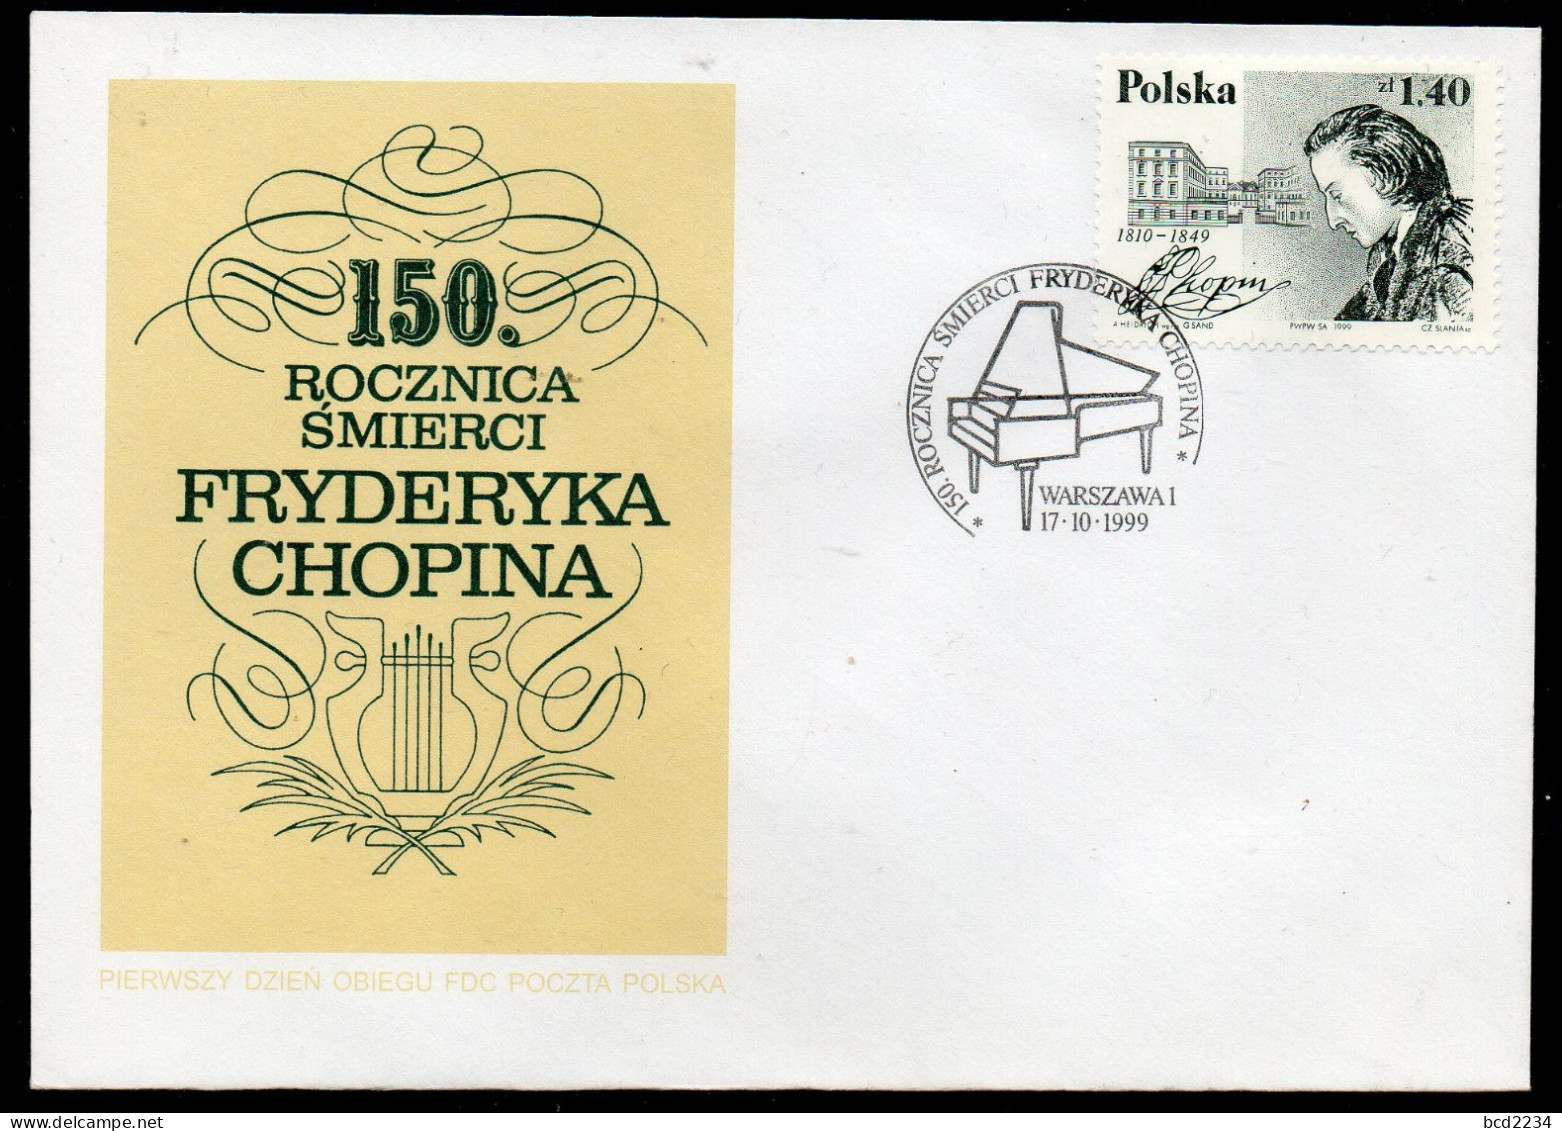 POLAND FRANCE SLANIA 1999 CHOPIN JOINT ISSUE FDC 150TH DEATH ANNIVERSARY COMPOSERS MUSIC PIANO POLISH FRENCH - Música